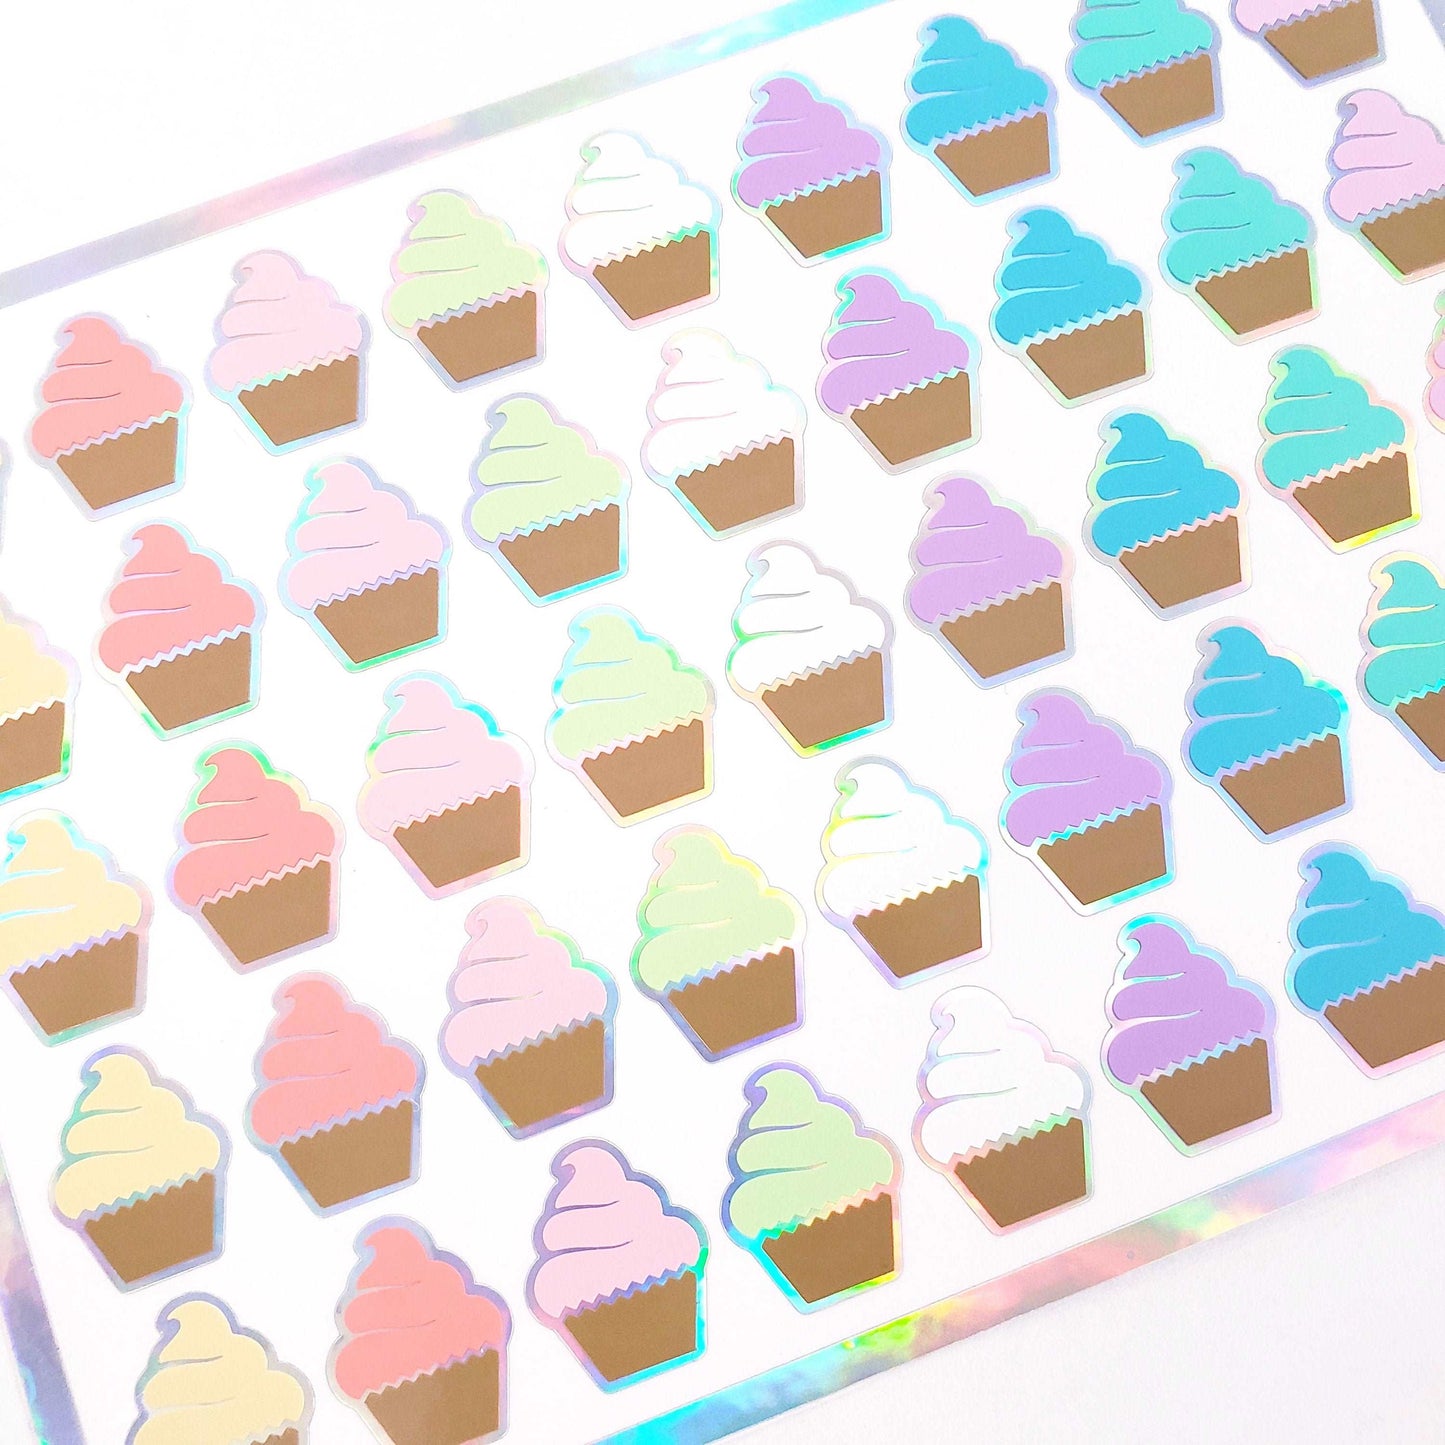 Cupcakes Stickers, set of 45 small birthday party cake decals for favors, invitations, envelopes and scrapbooks, pastel rainbow colors